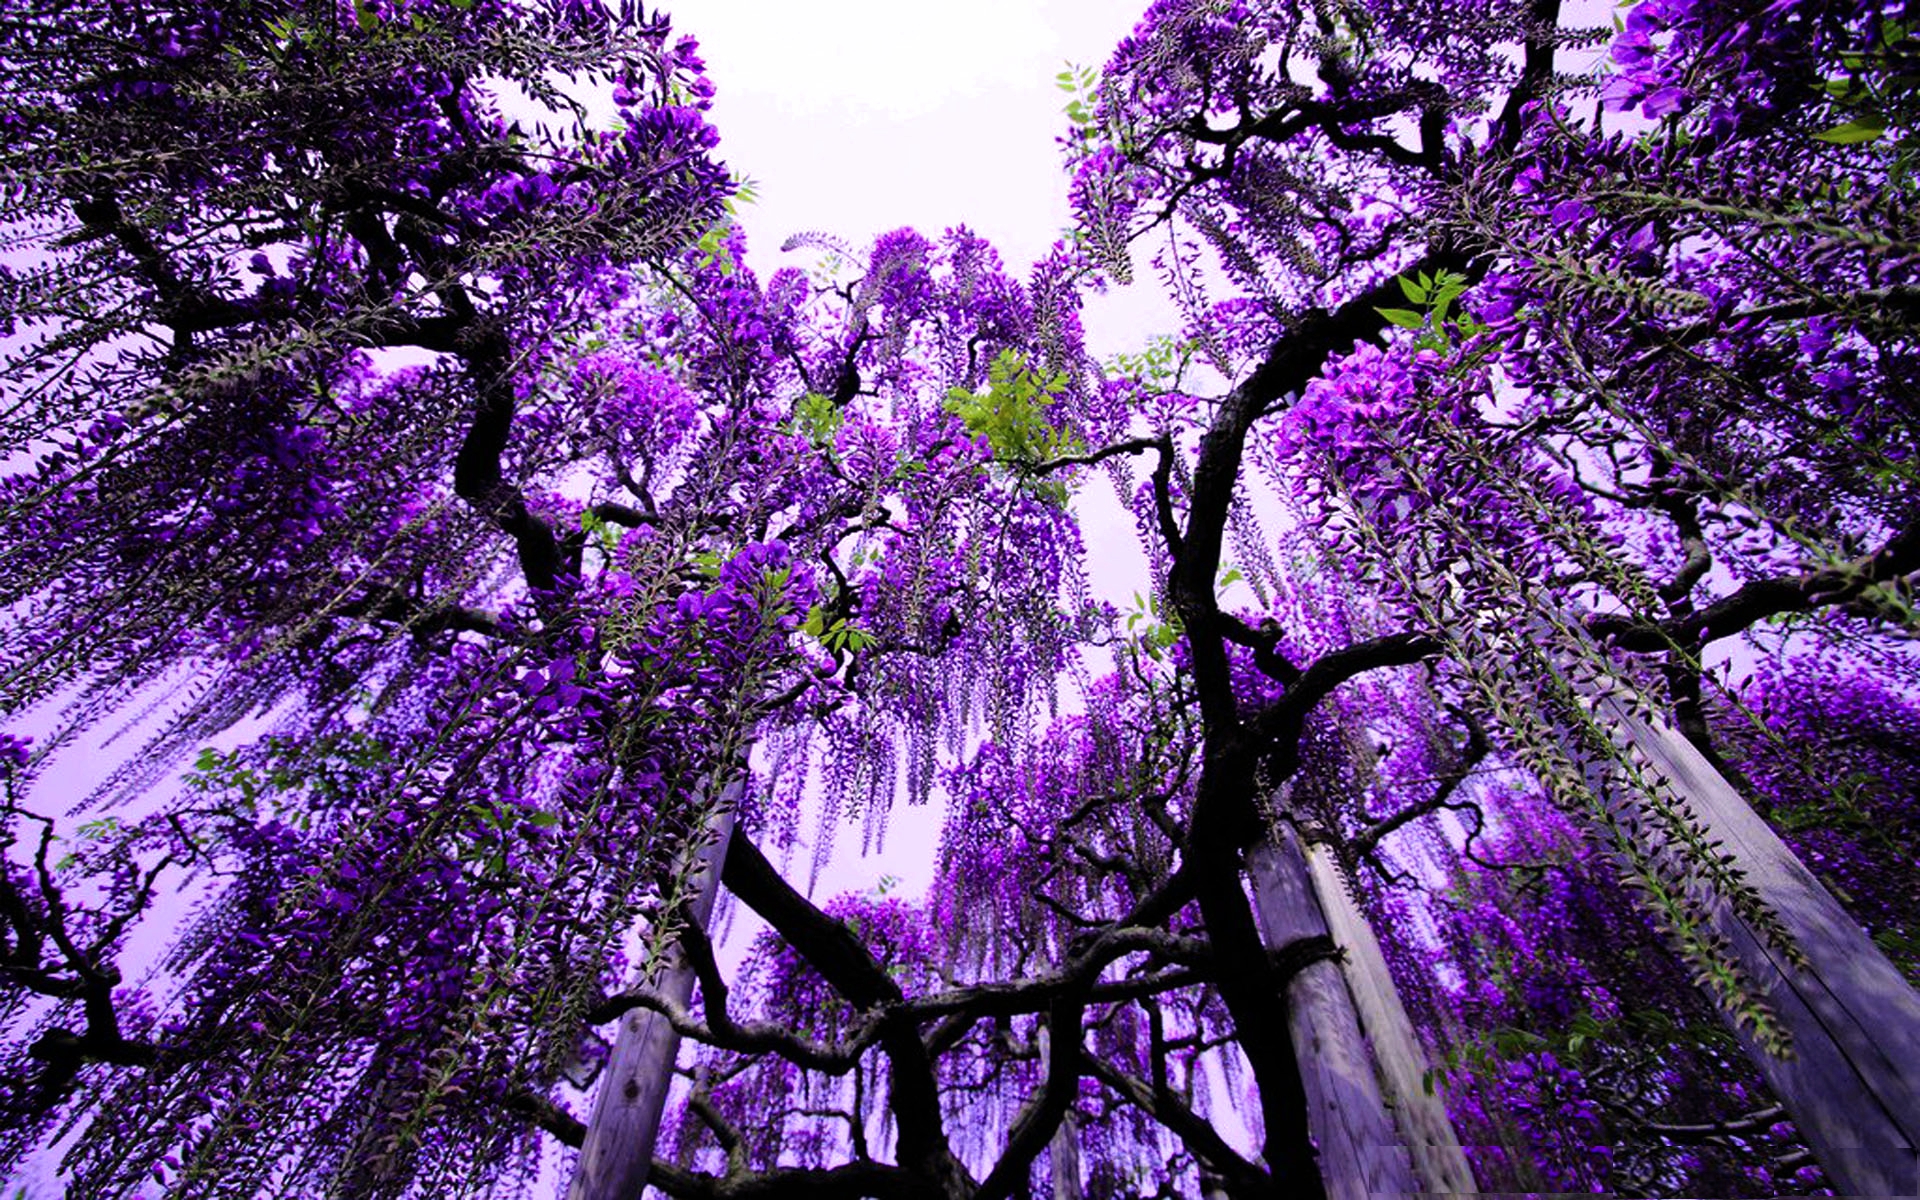 Popular Wisteria Image for Phone